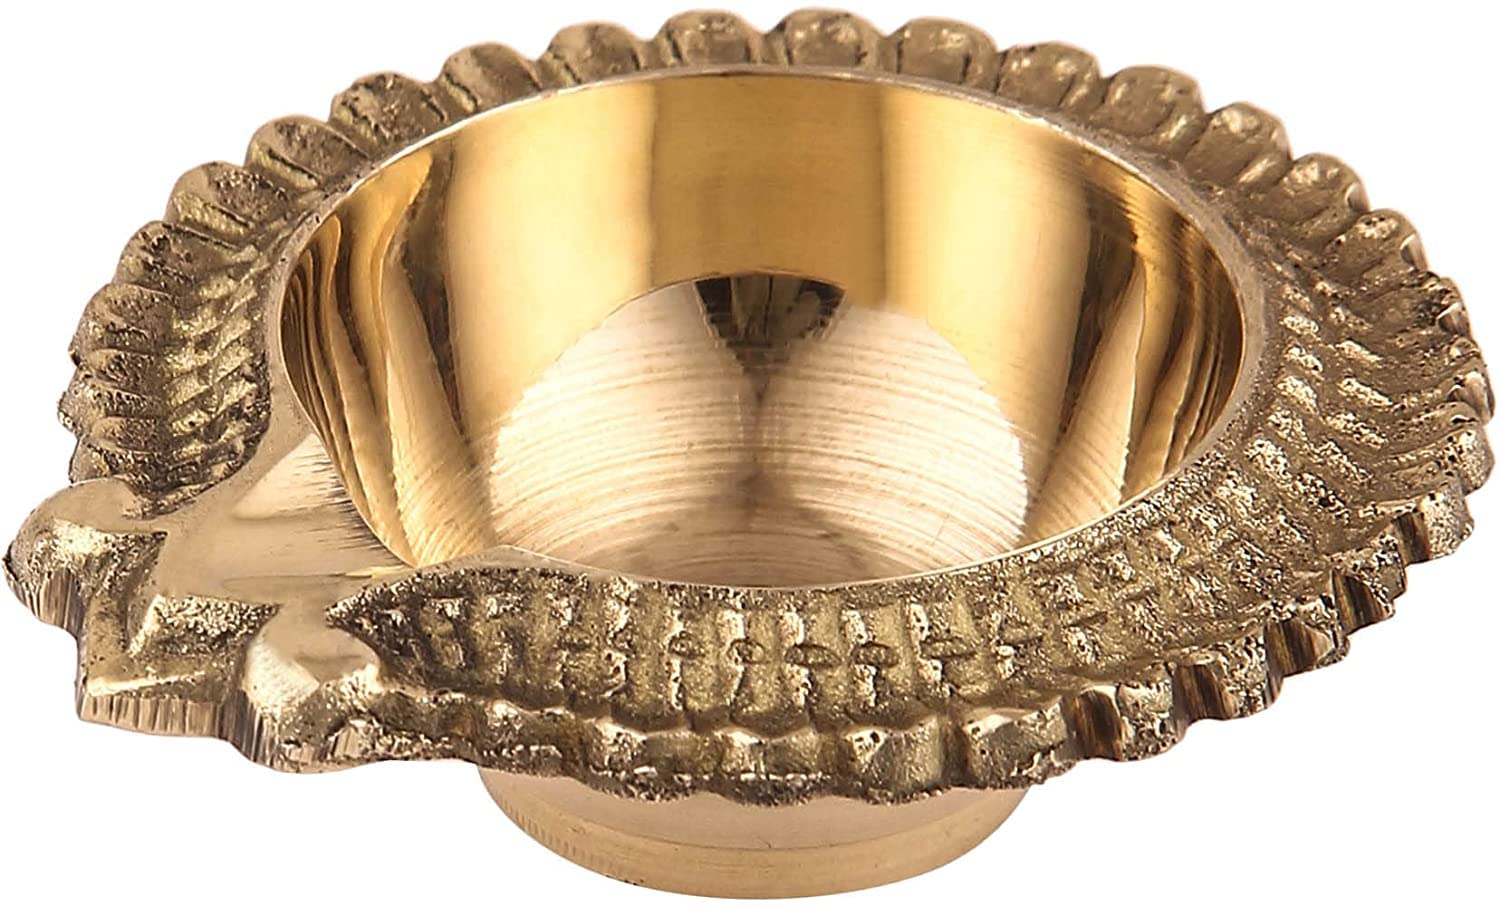 Dokchan Brass Antique Kuber Diya for Daily Puja & Festival